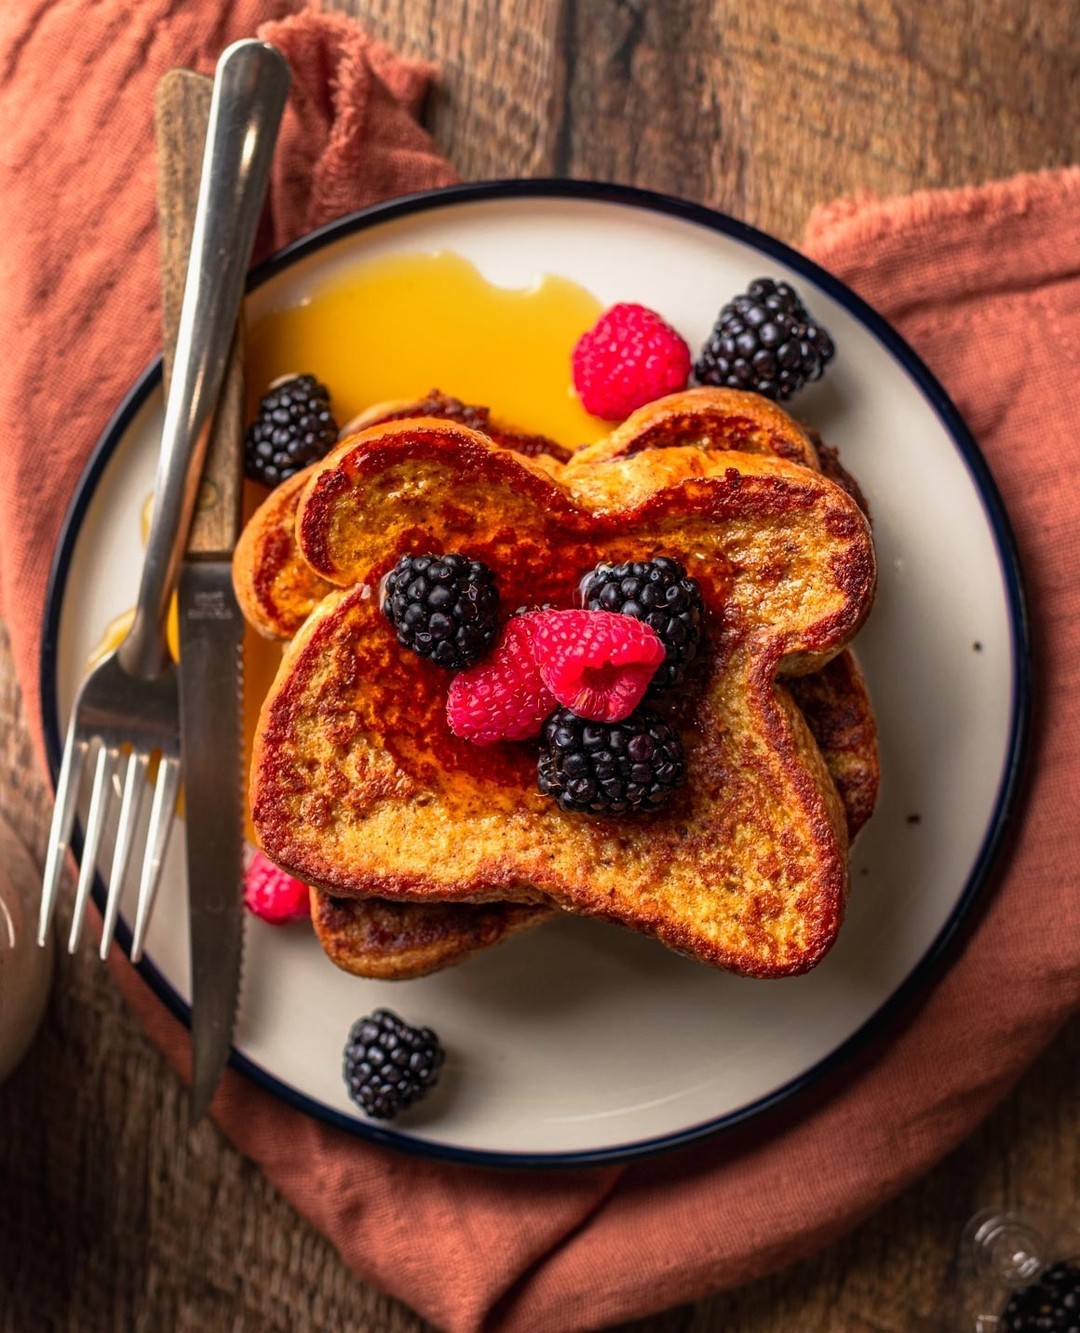 Looking for a quick and easy brunch for two? Learn how to make the best Vegan French Toast for an easy eggless and dairy free breakfast. Perfectly crispy on the outside and fluffy on the inside. 🤤⁠
⁠
Get the full recipe at LINK IN BIO 👆 or at www.twomarketgirls.com